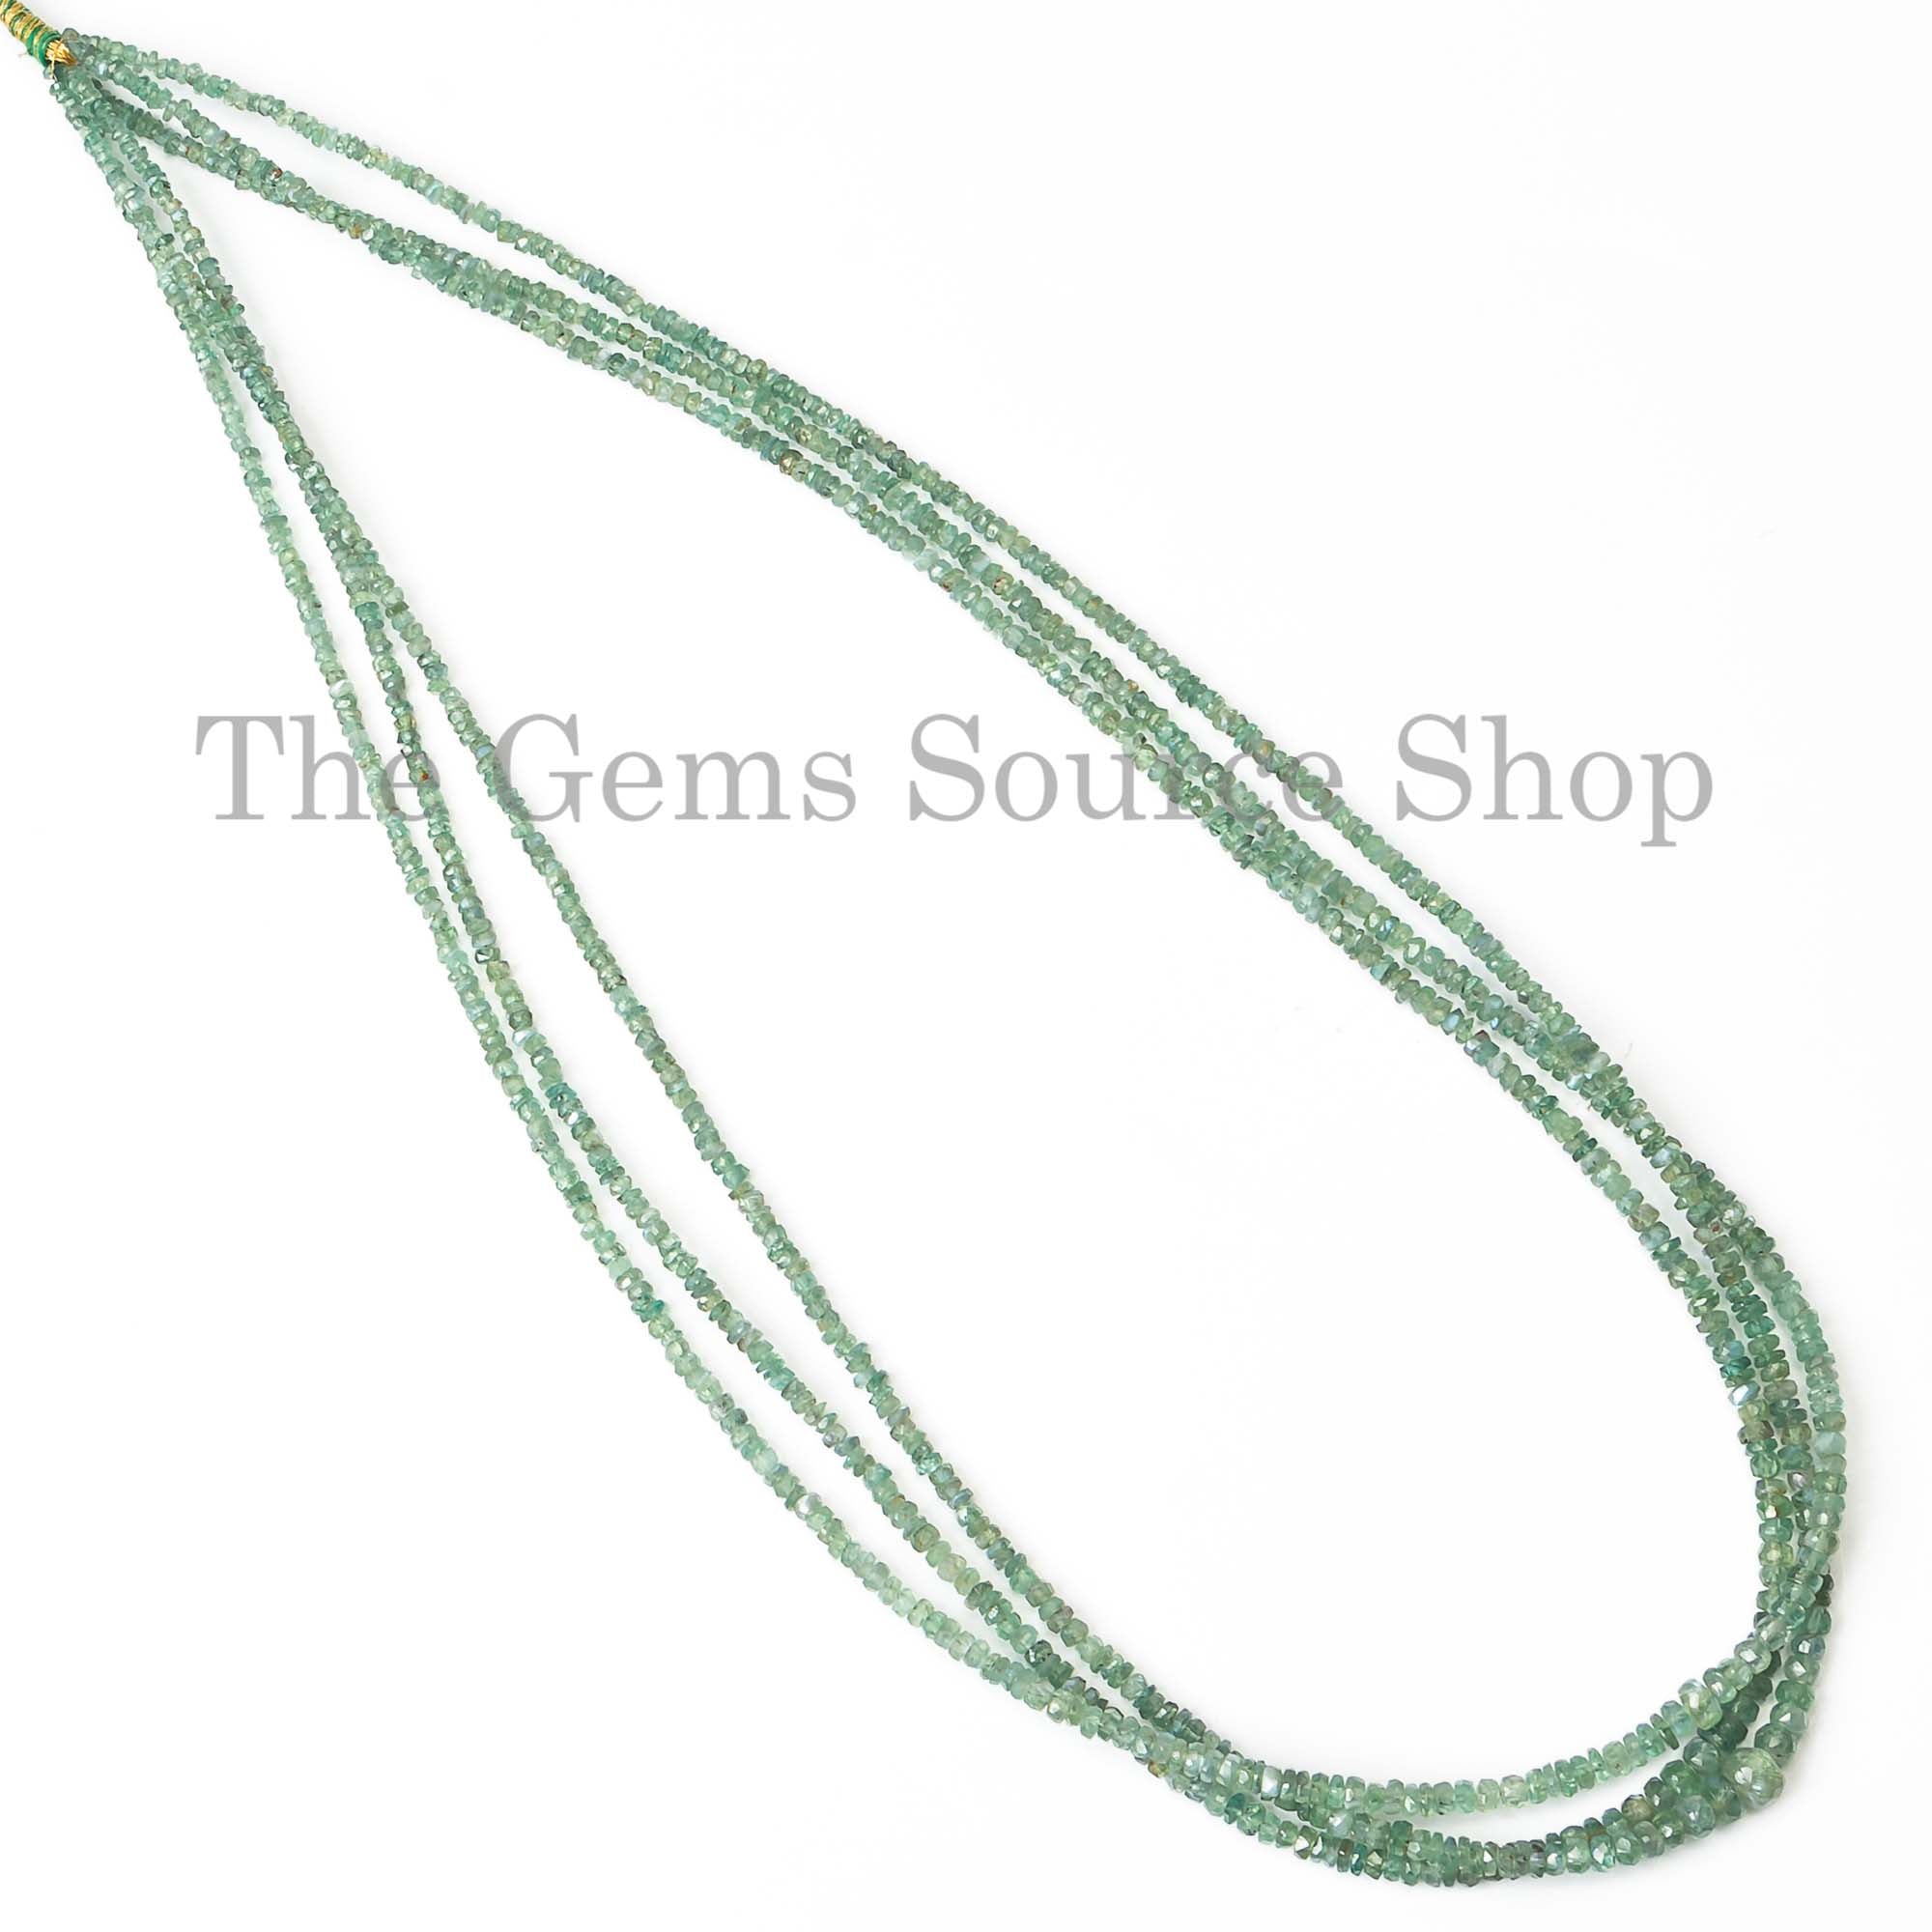 Extremely Alexandrite 2-4mm Faceted Rondelle Beads, AAA Quality Alexandrite Beads, Alexandrite Beads